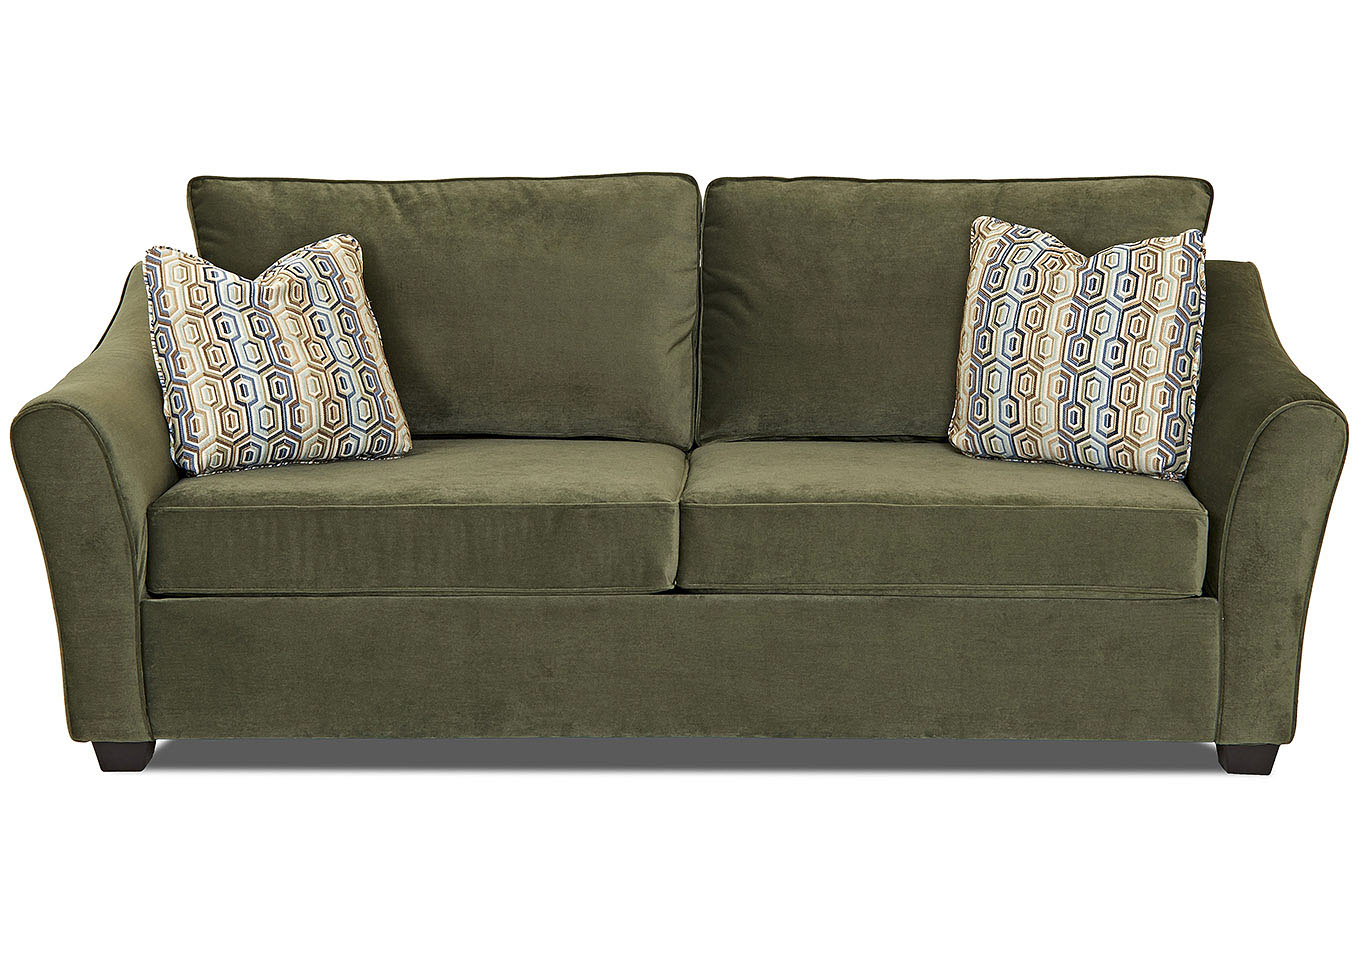 Linville Moss Green Stationary Fabric Sofa,Klaussner Home Furnishings